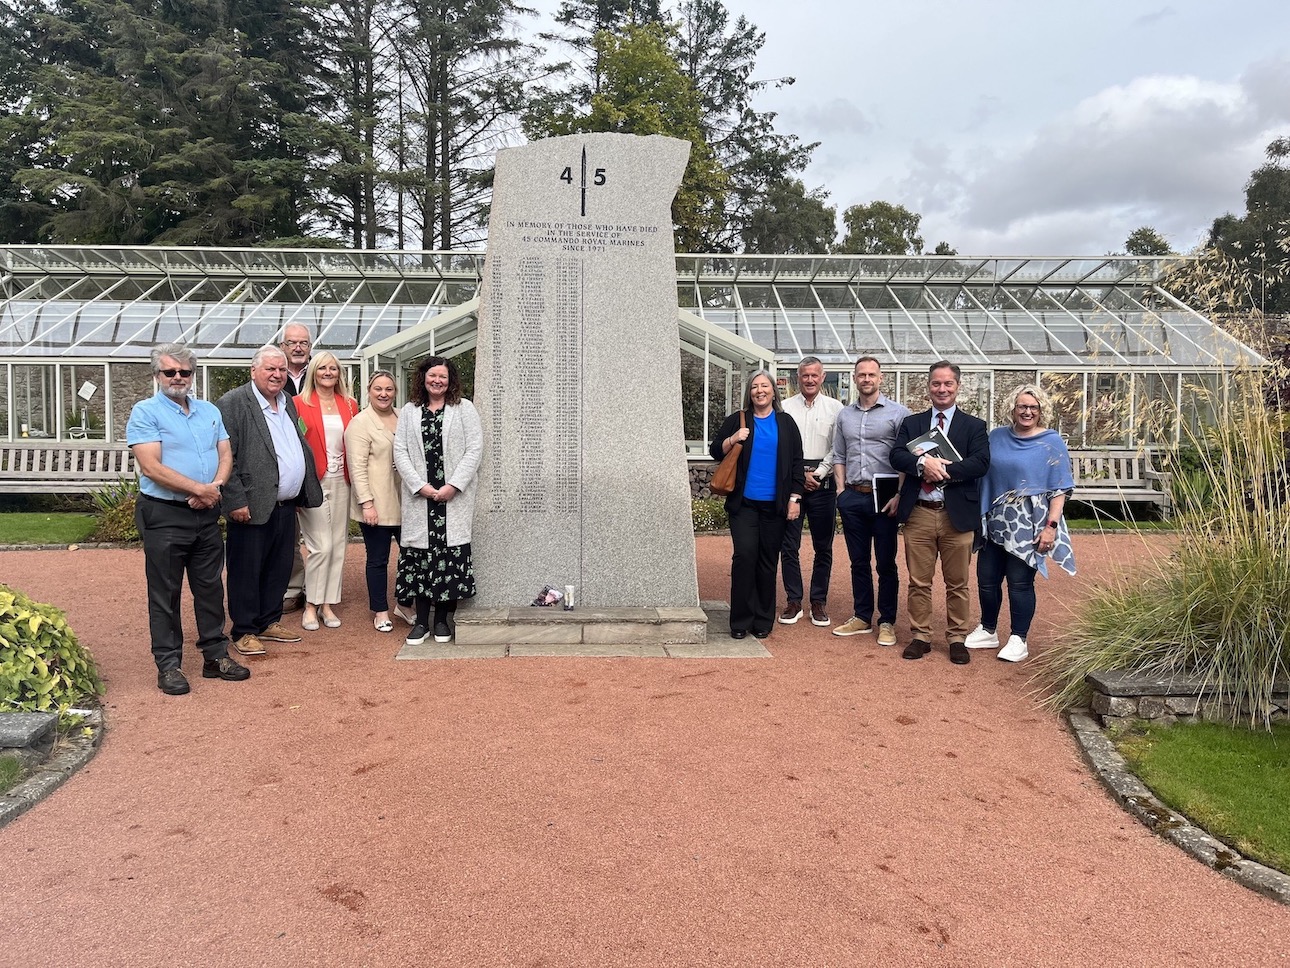 Members of the Highland Gold Network at the RM Condor memorial.